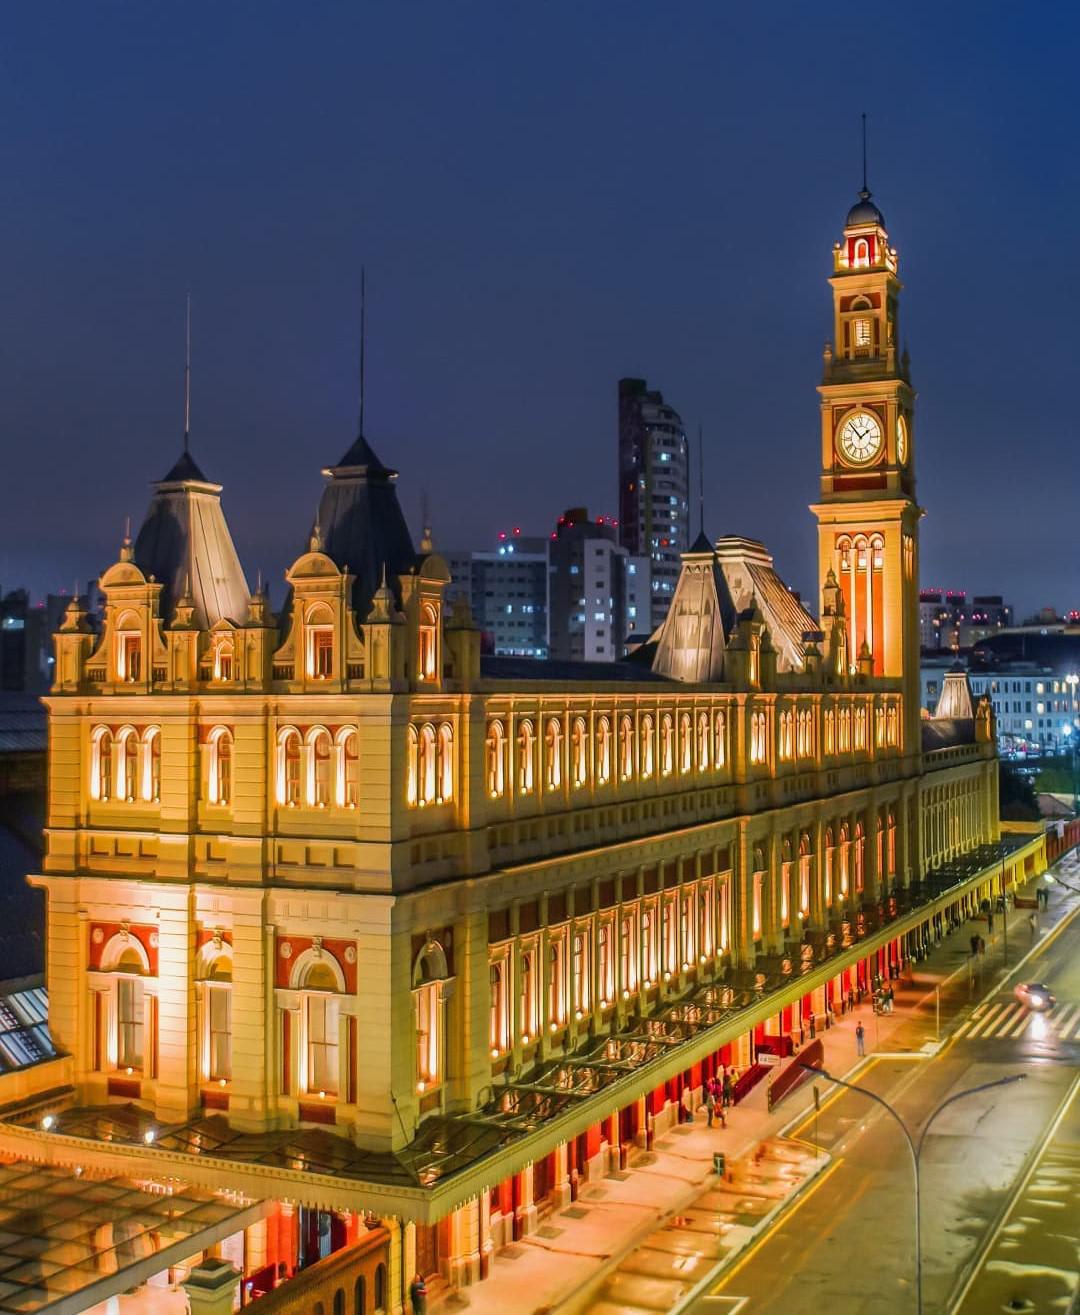 Luz train station and Portuguese Language museum in São Paulo city - this building was inspired by the Australian Flinders Street Station